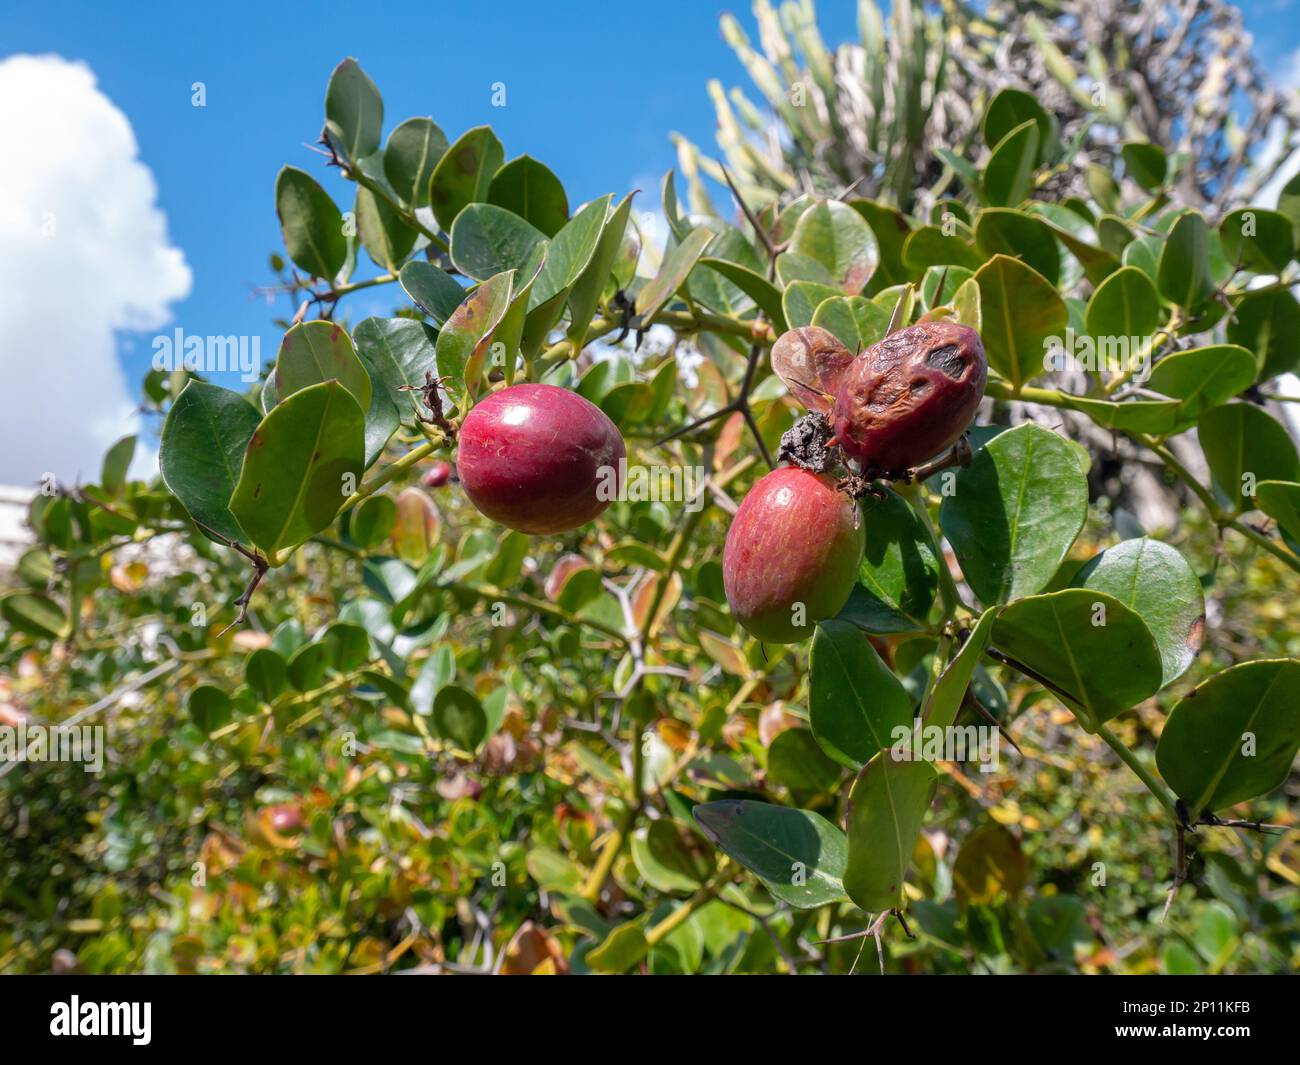 Carissa bispinosa or Y-thorned carissa plant branches with glossy leaves, thorns and ripe red fruits Stock Photo